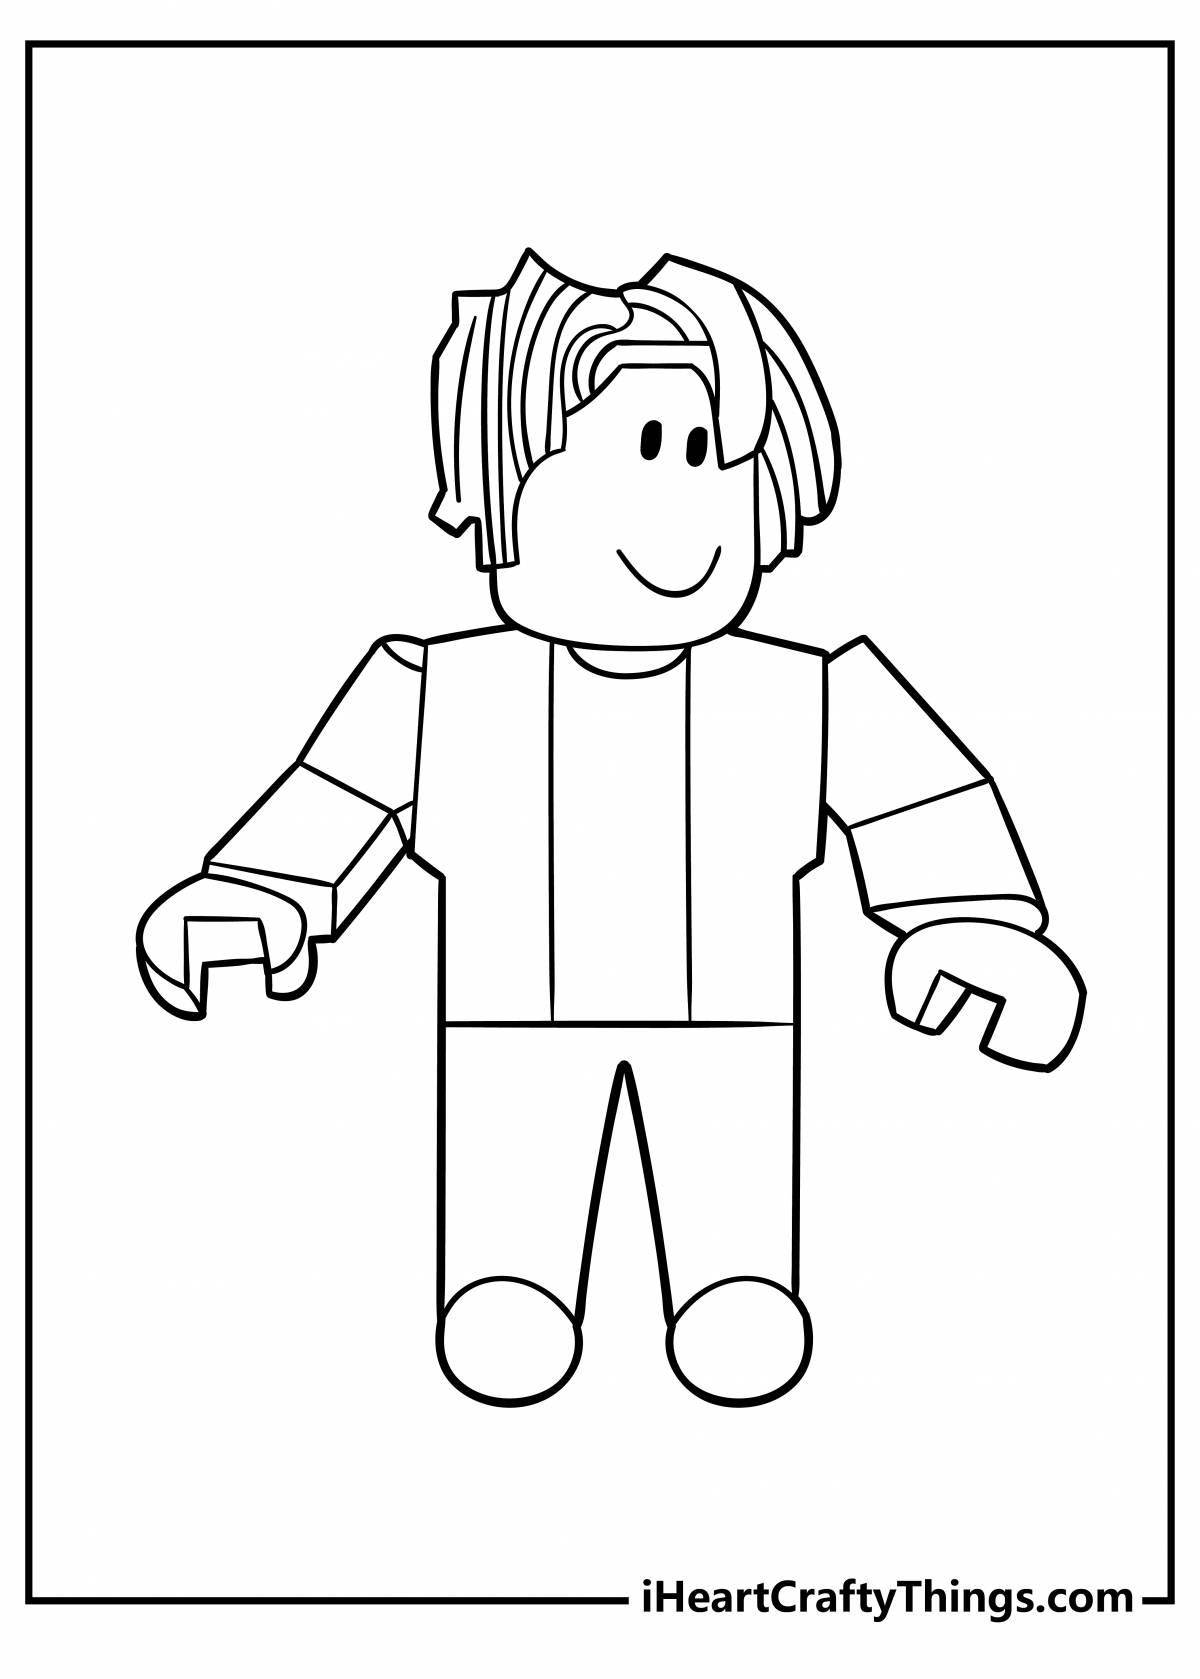 Intricate roblox brookhaven coloring page